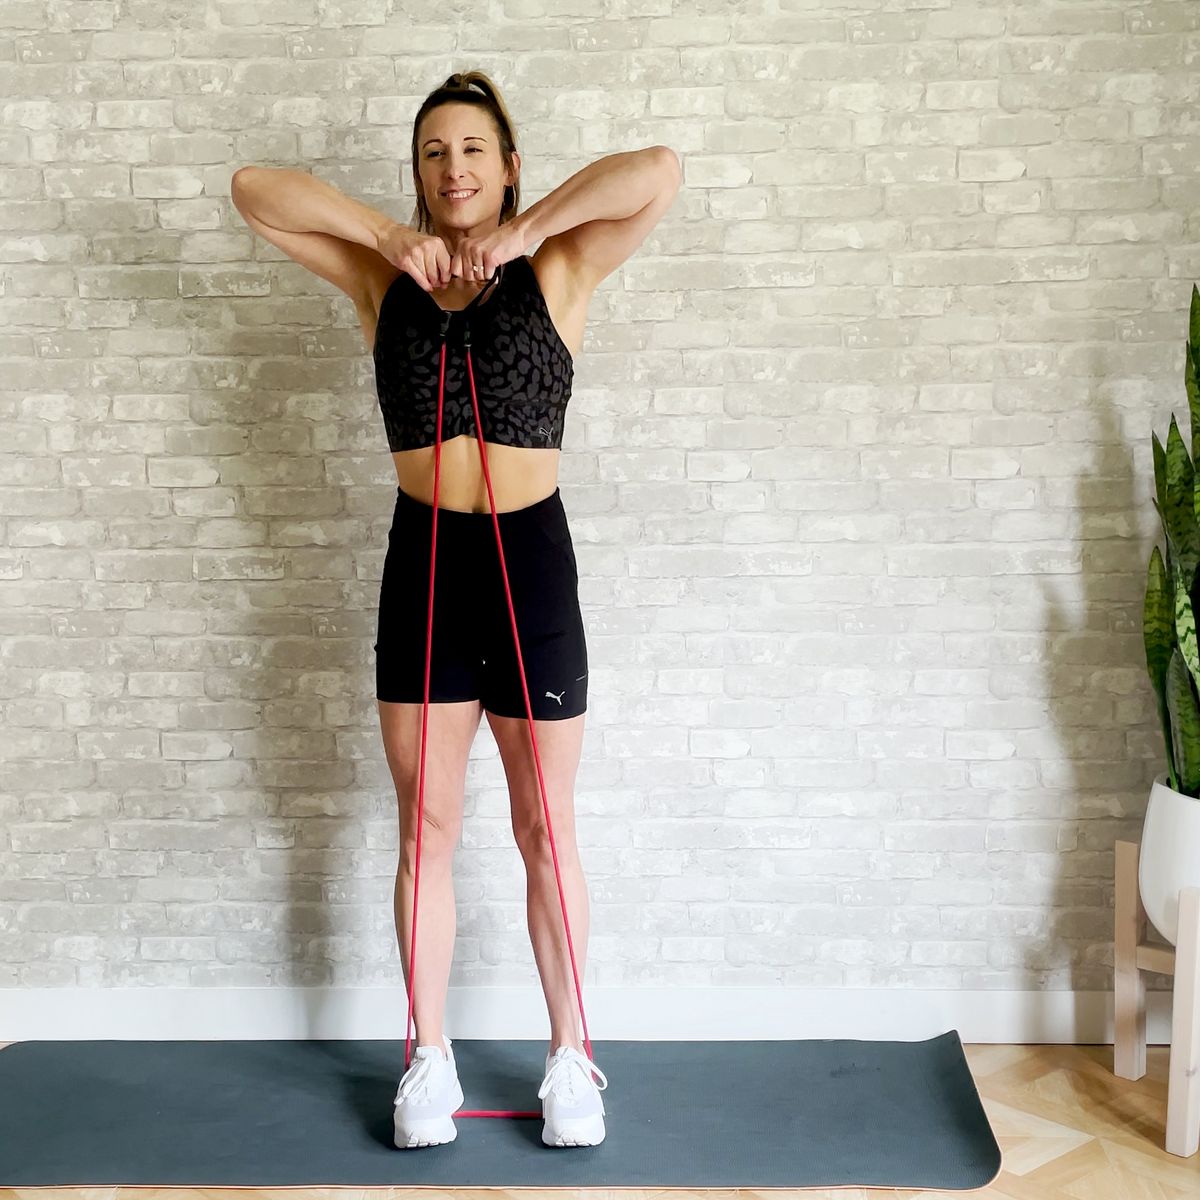 24 Mini Band Exercises - Chest, Back, Shoulders, Arms, Core